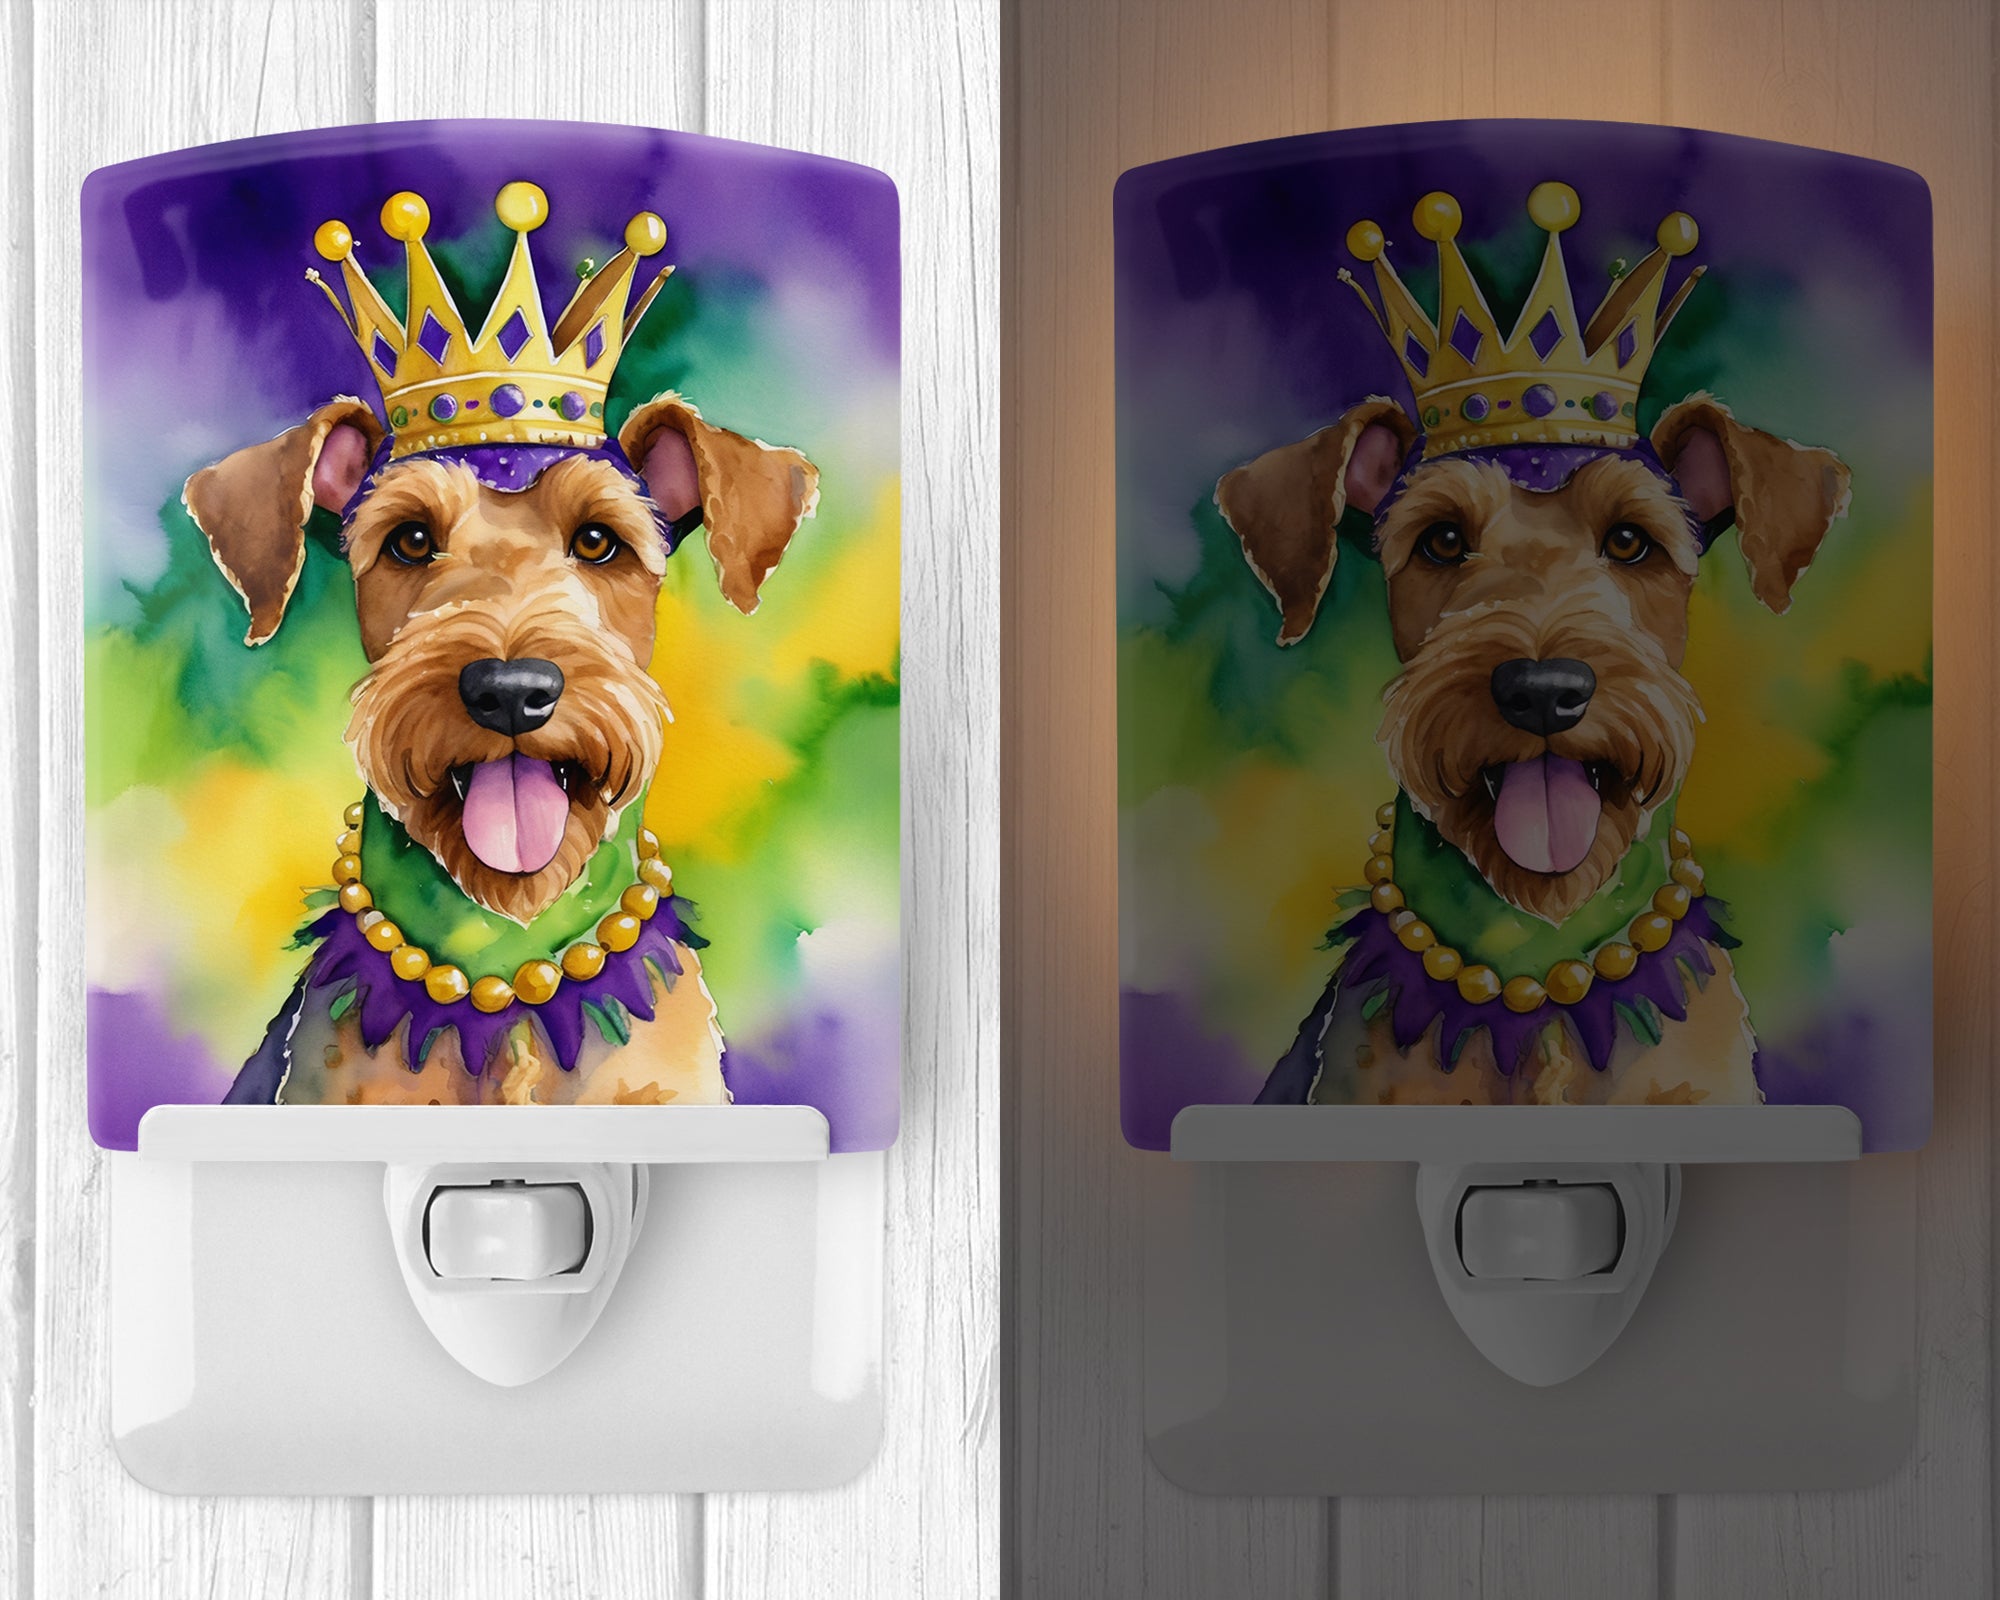 Buy this Airedale Terrier King of Mardi Gras Ceramic Night Light